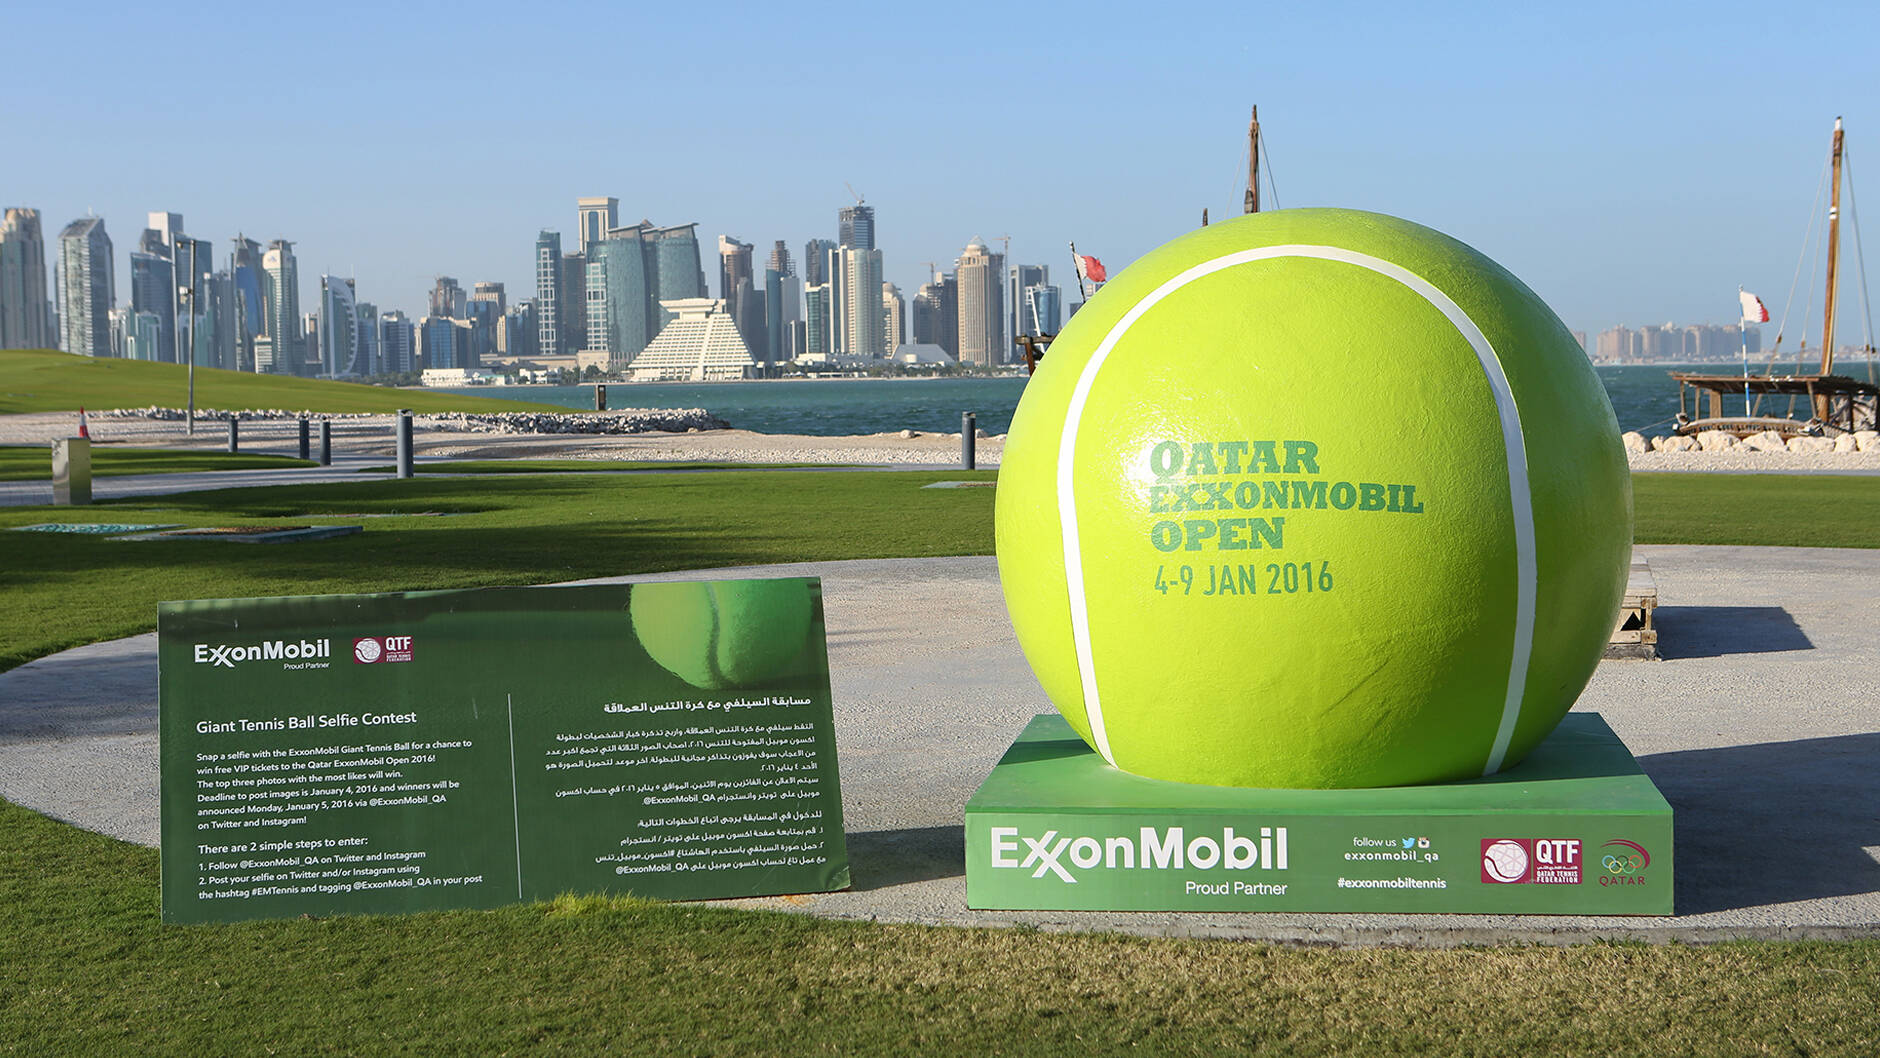 In the lead-up to the tournament, the Giant Selfie Ball Competition gave community members the opportunity to take and post photos with a number of oversized tennis balls at key locations including Souq Waqif, the Corniche and Katara, for a chance to win VIP tickets.